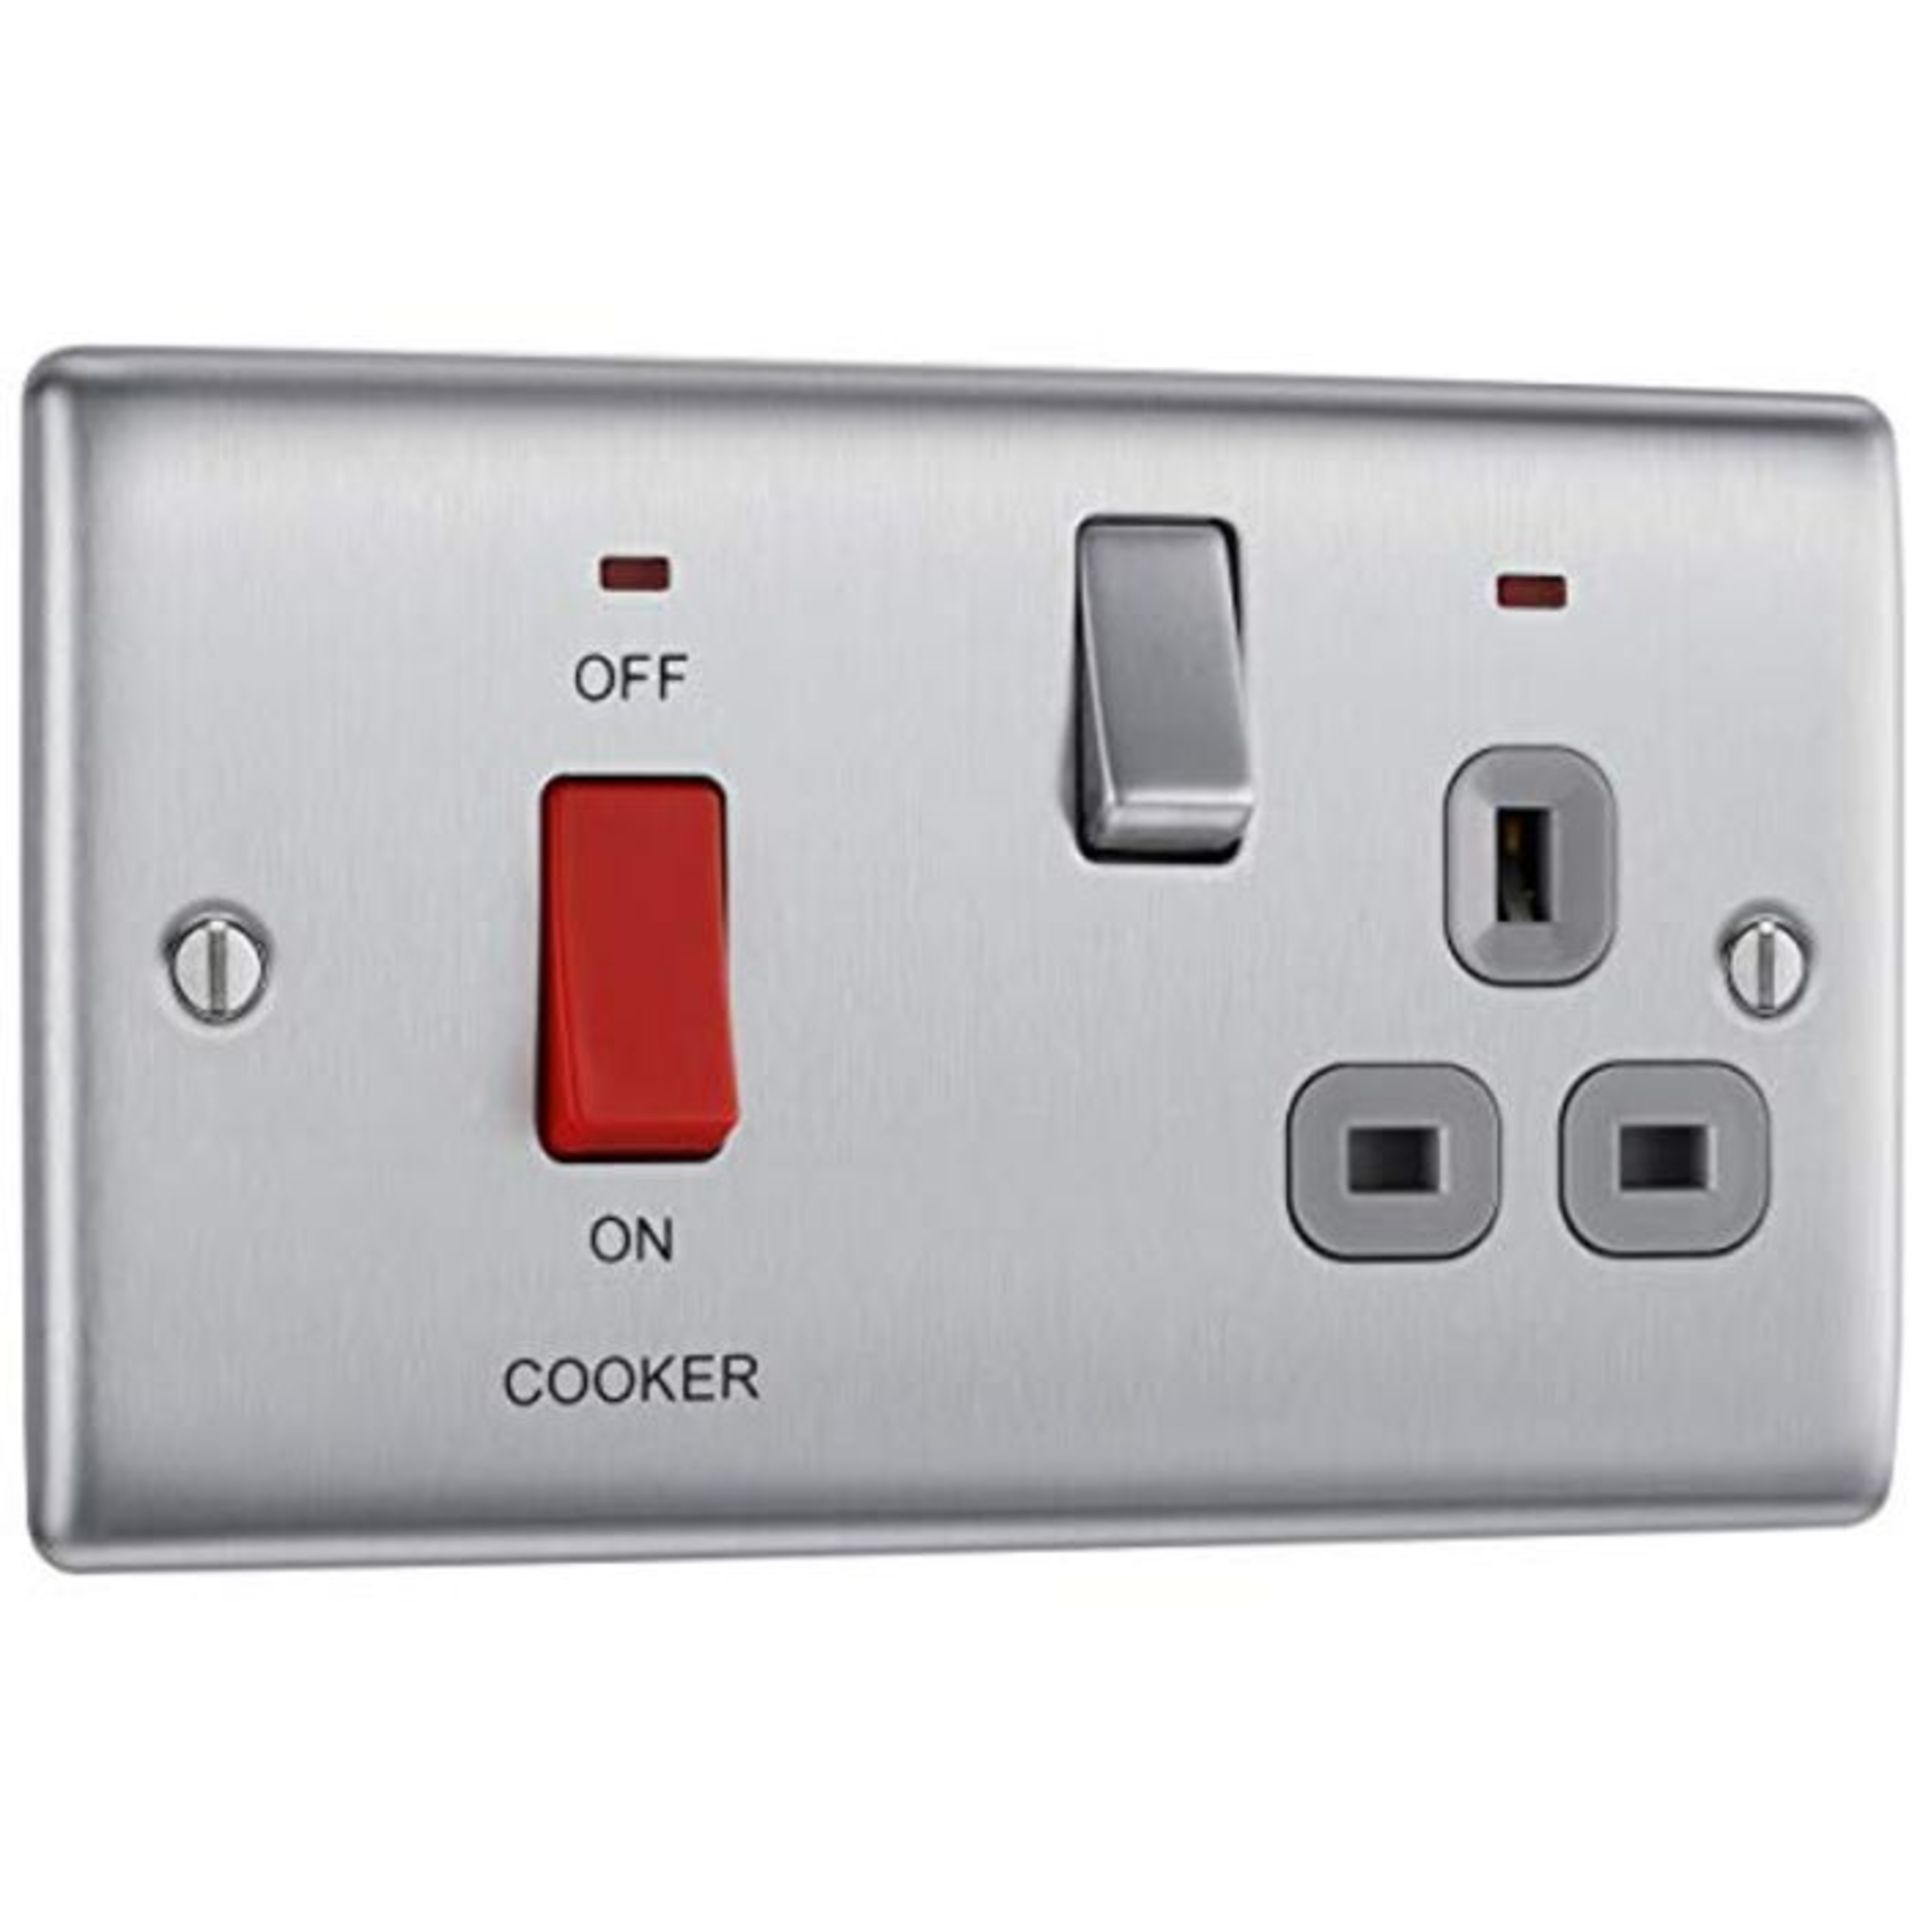 BG Electrical NBS70G-01 Switched Cooker Control Unit with a Power Indicator and Socket